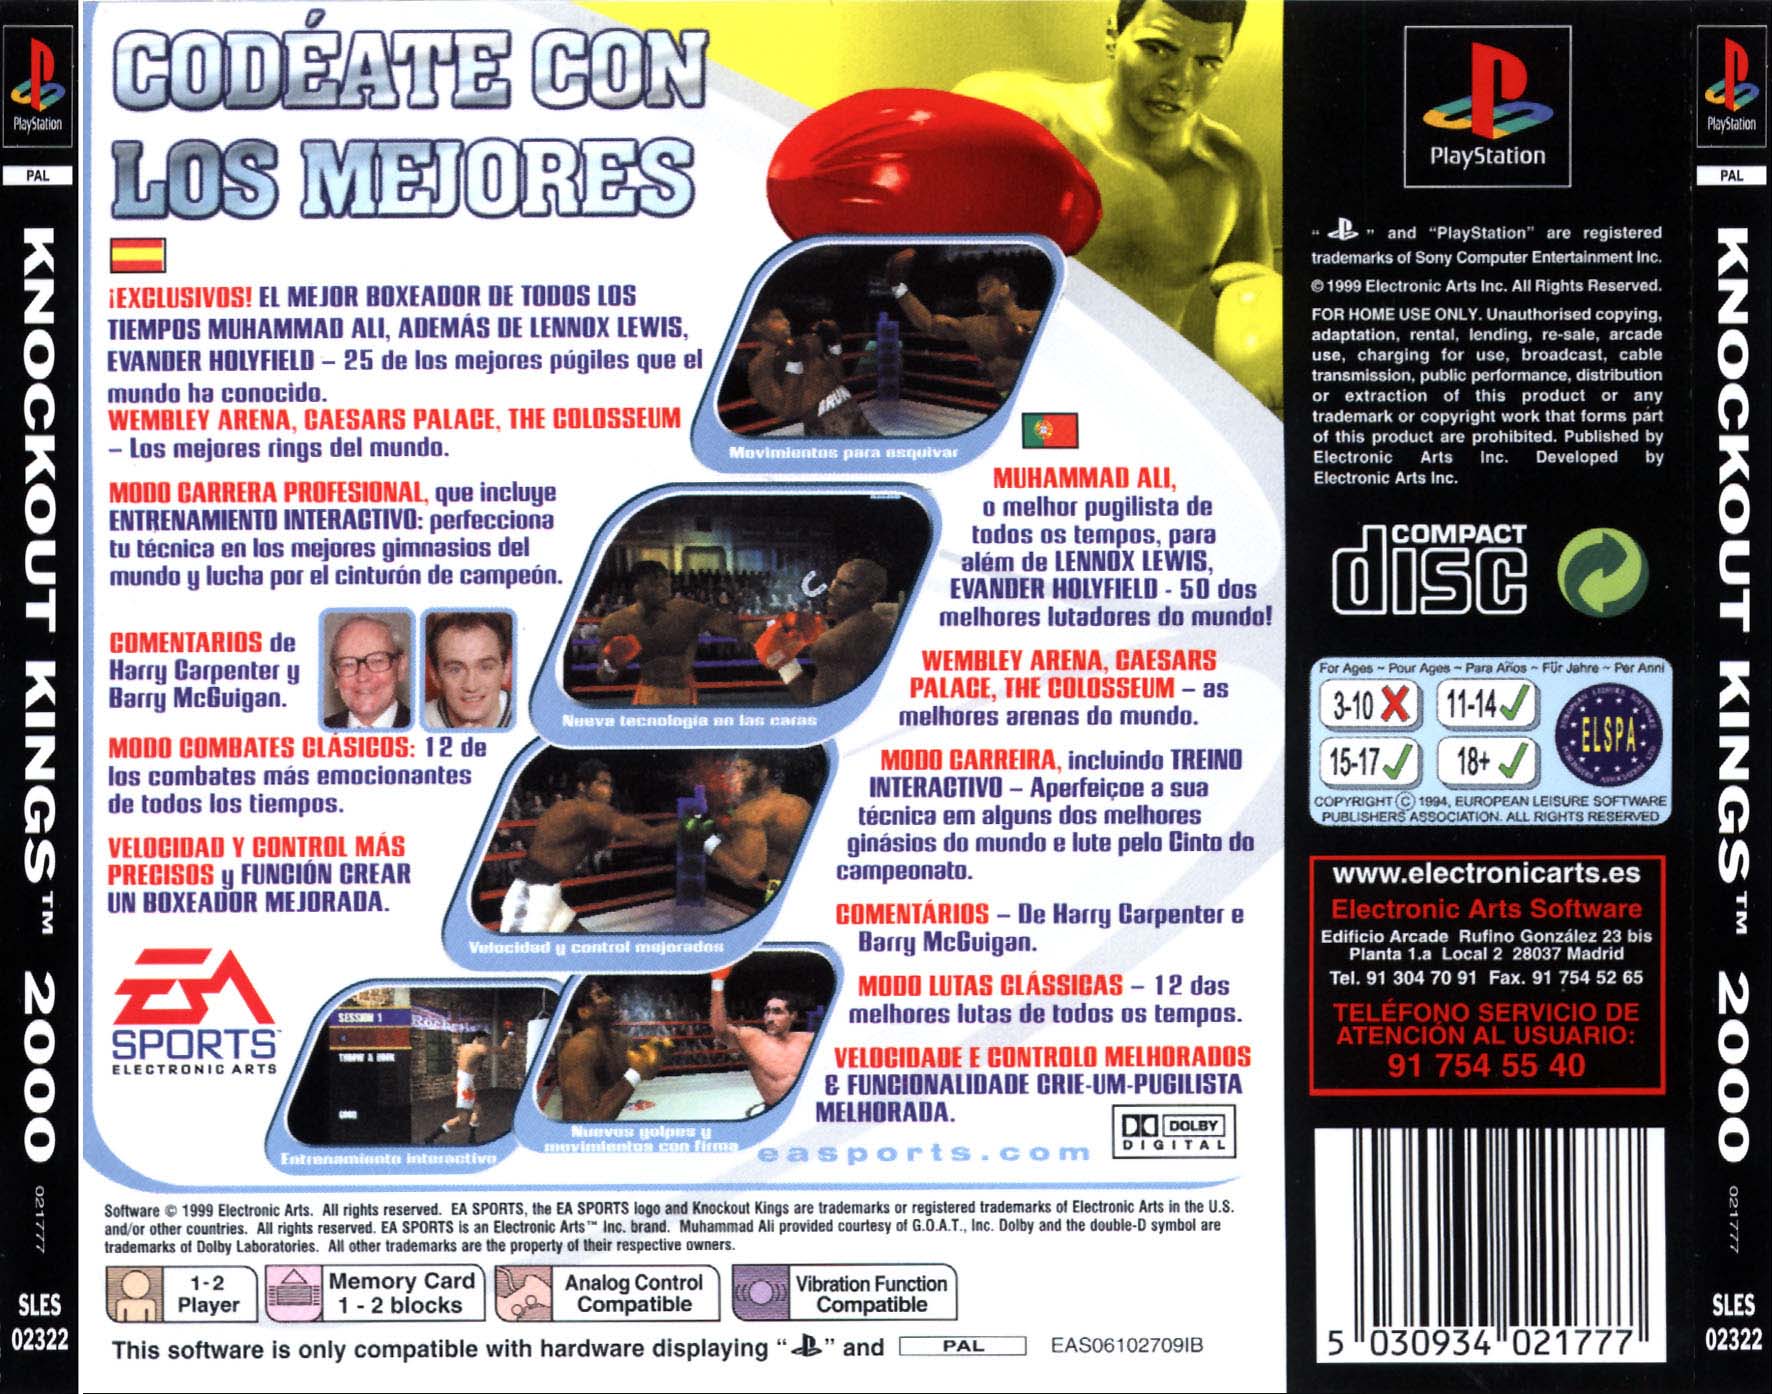 Knockout Kings 2000 PSX cover